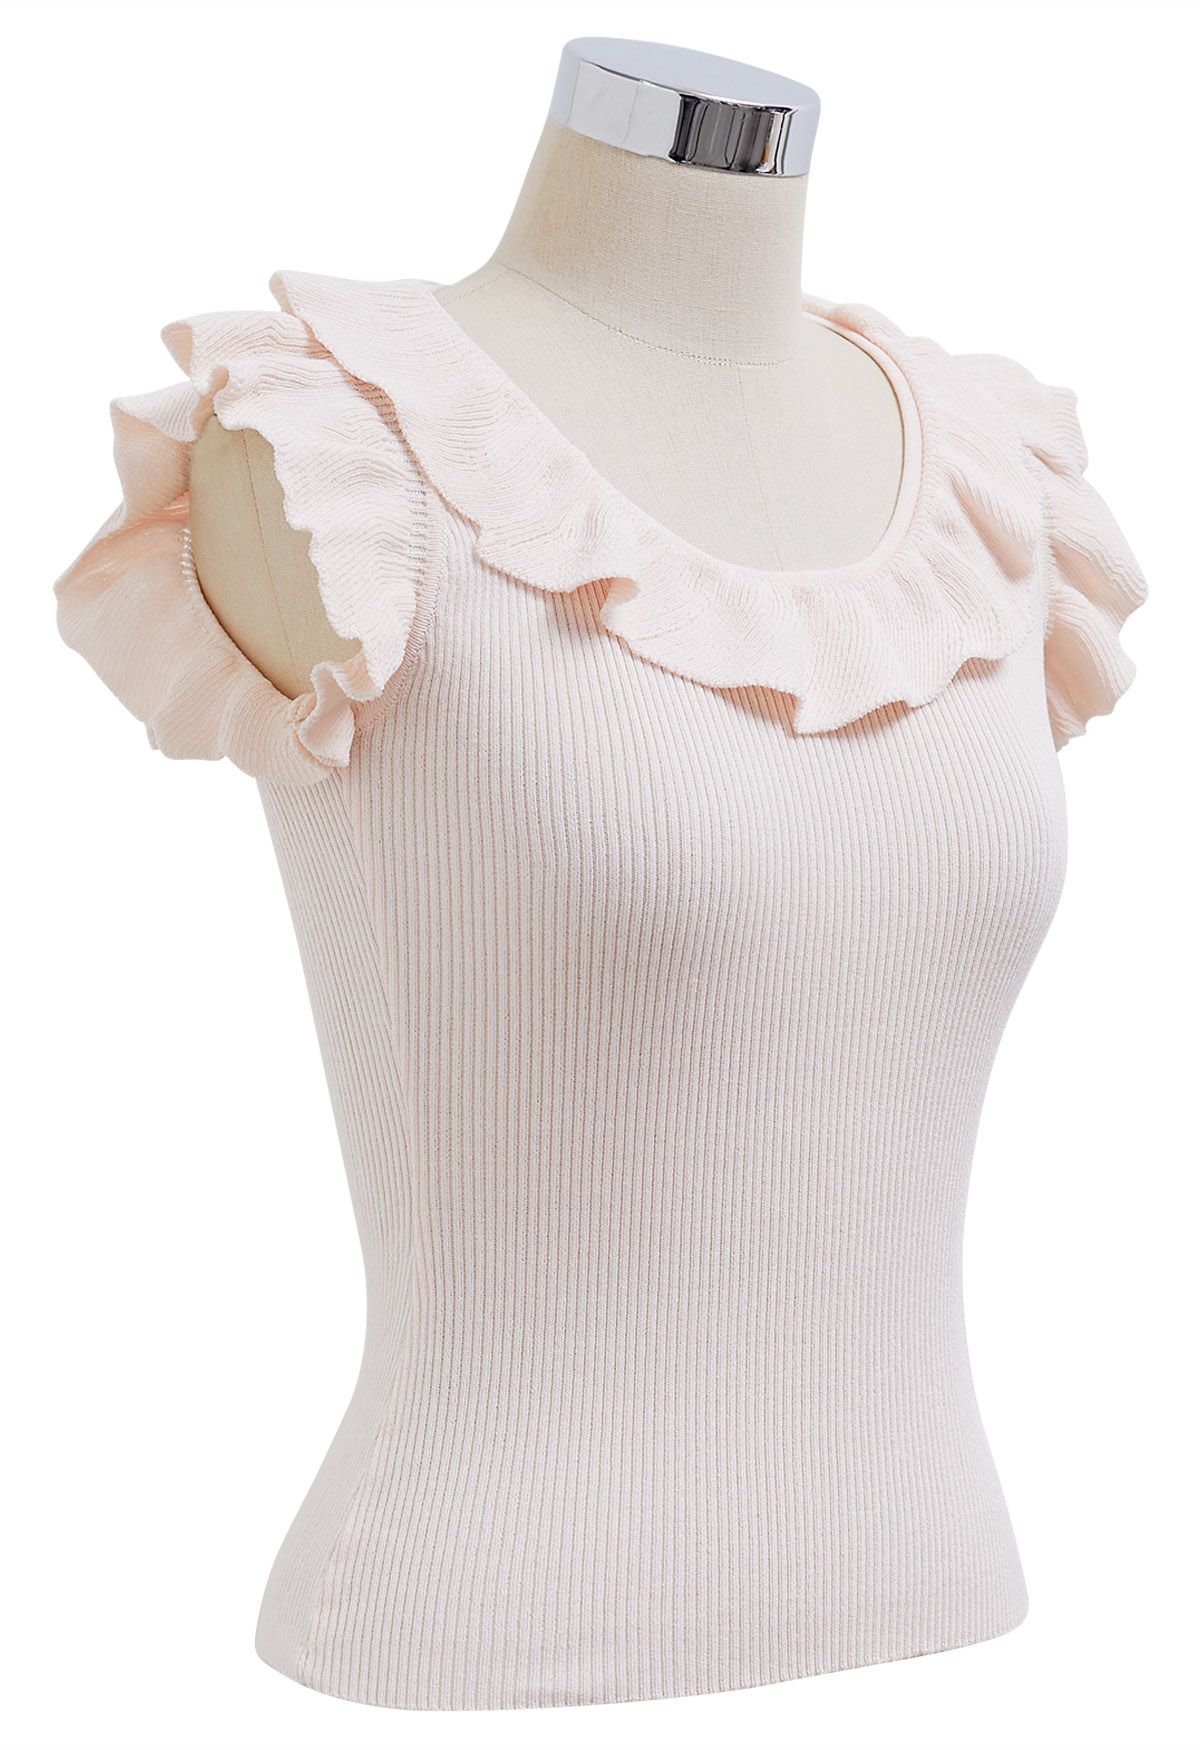 Ethereal Ruffle Sleeveless Knit Top in Light Pink